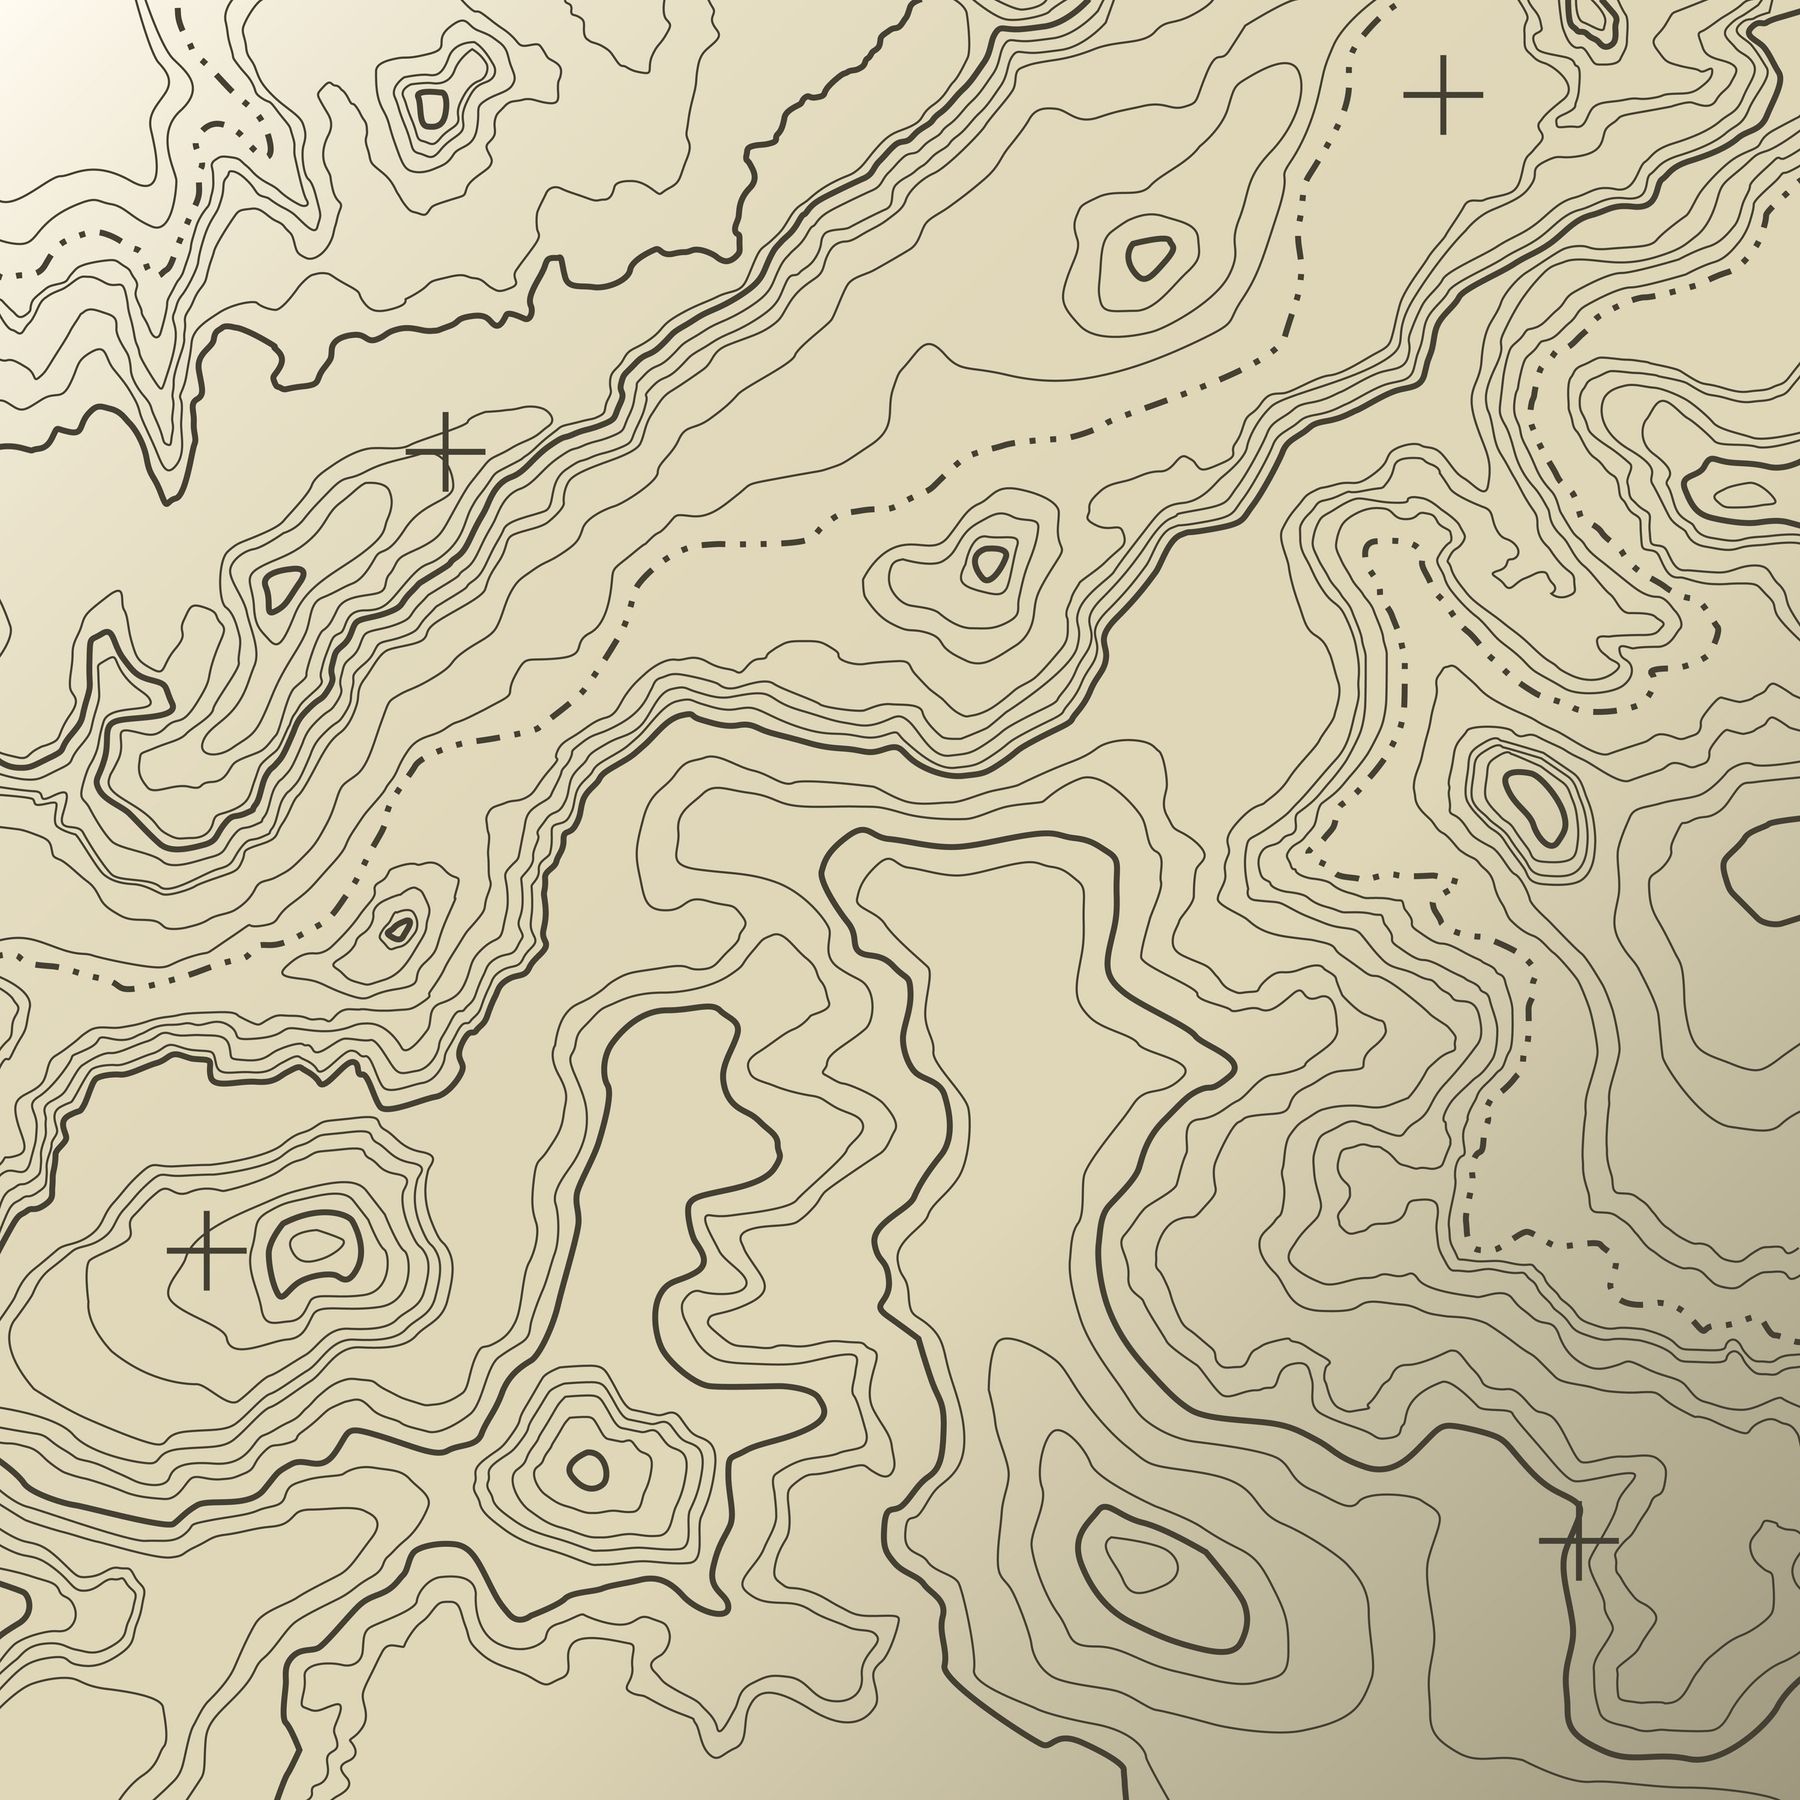 Buy Topographical map wall mural US shipping at Happywall.com